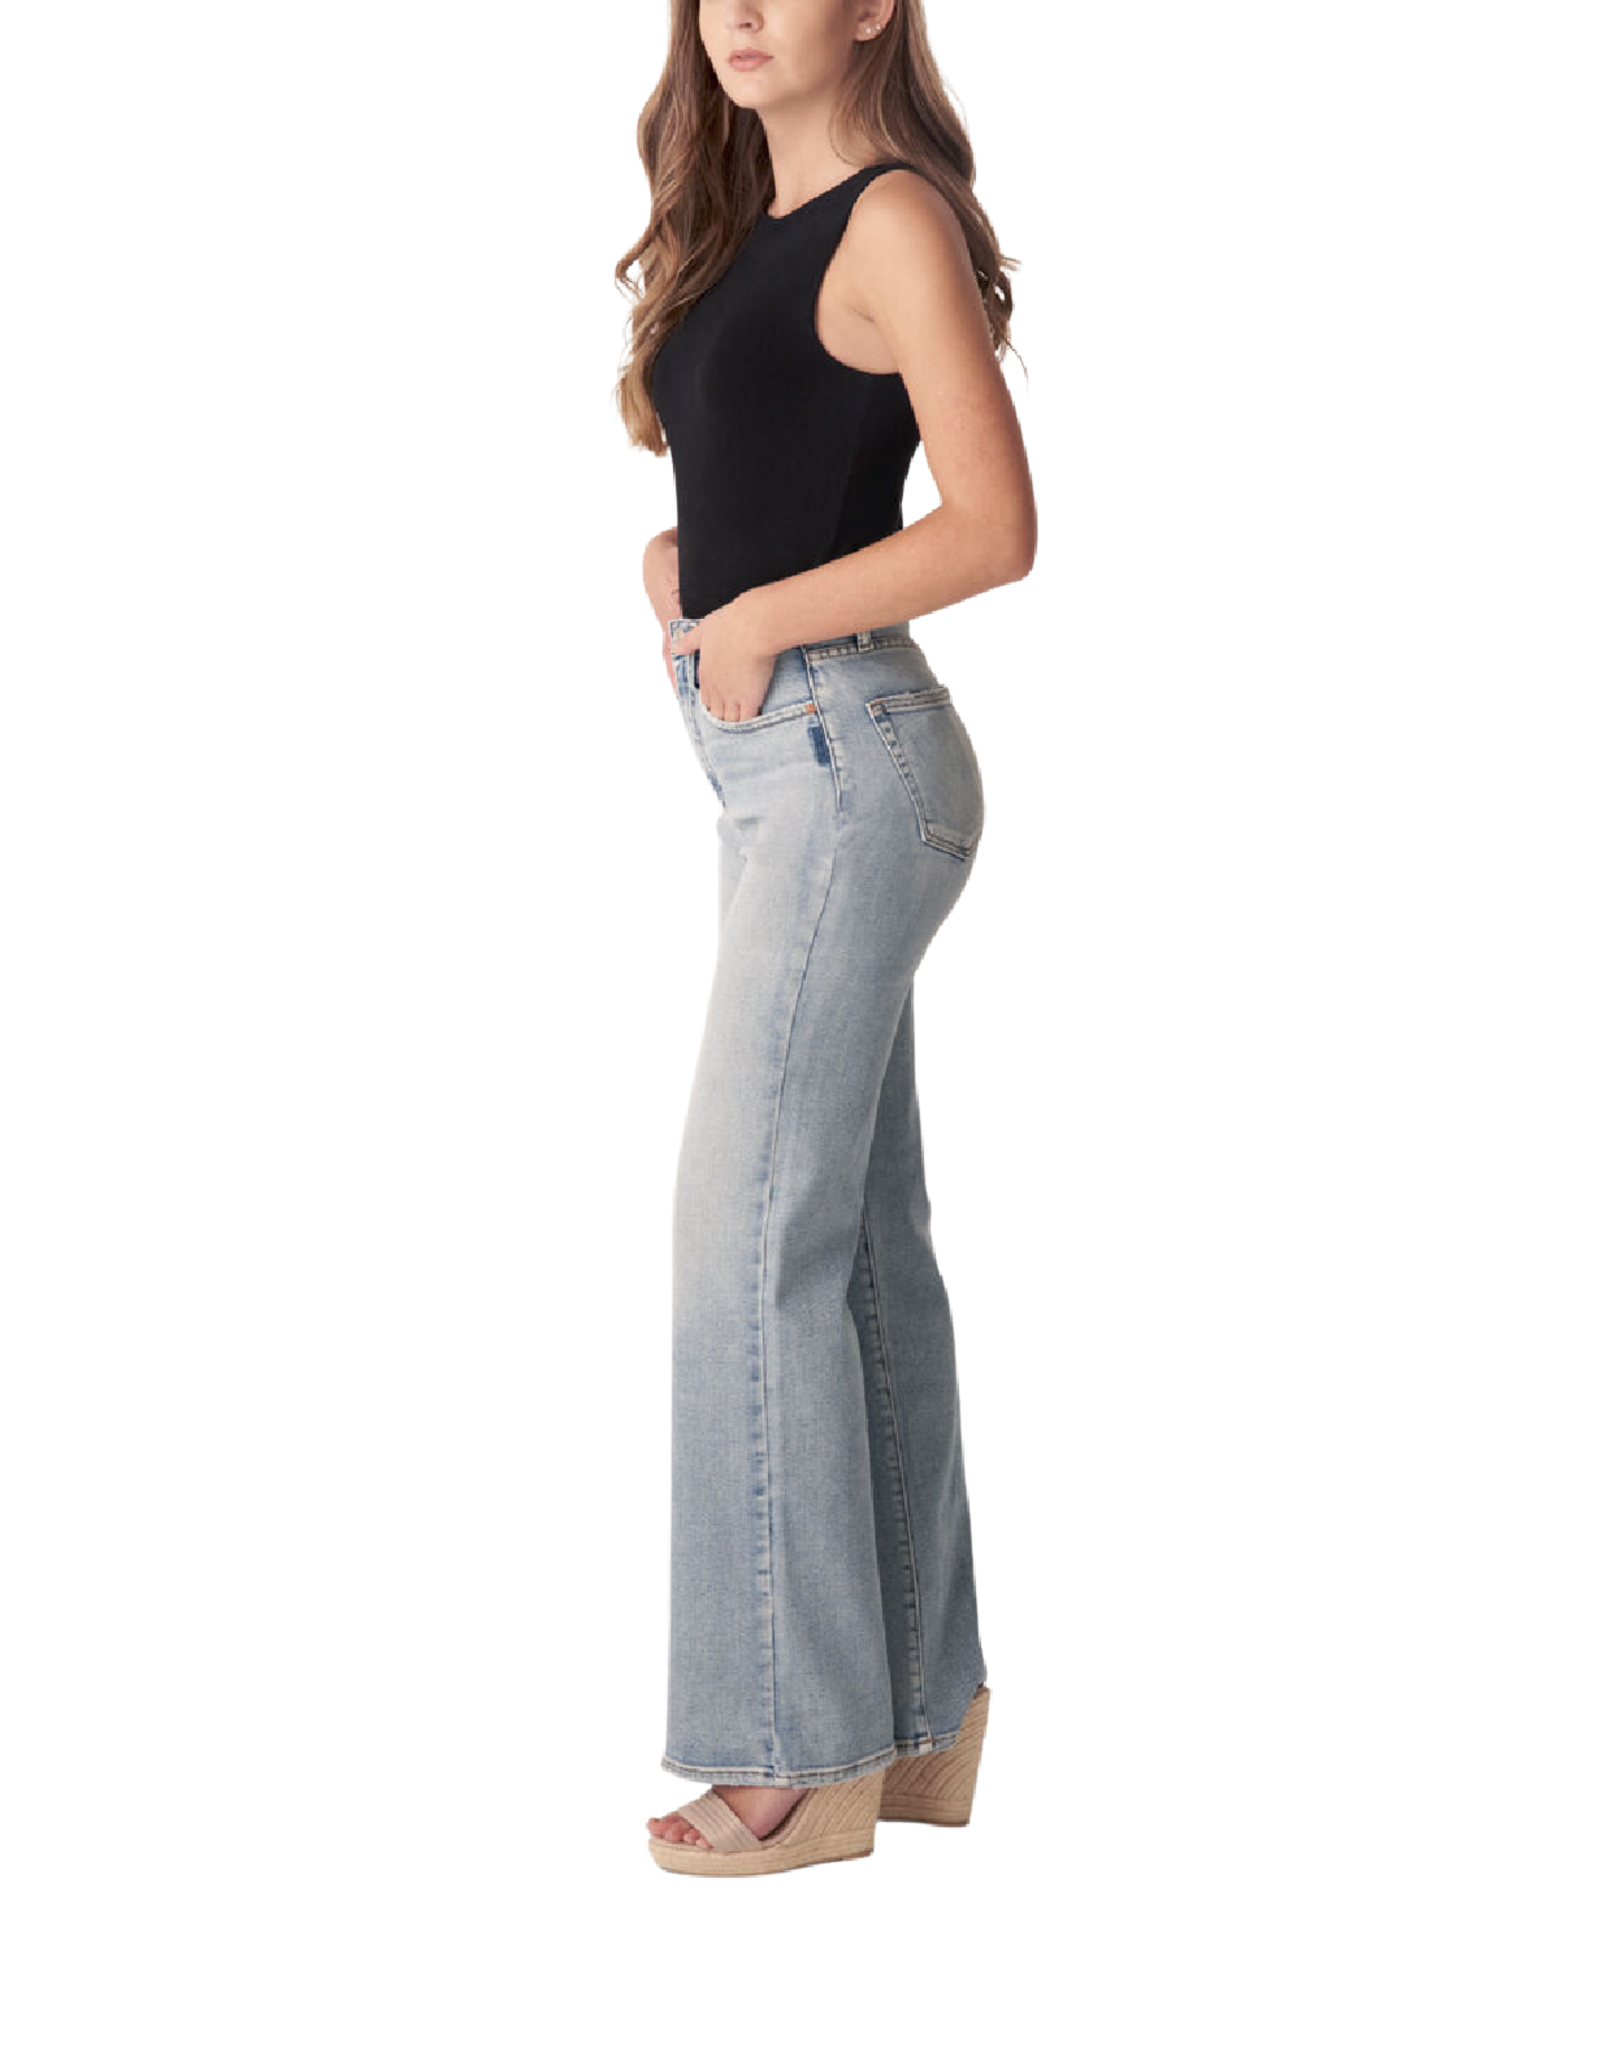 Silver Jeans - Highly Desirable Trouser 31" inseam